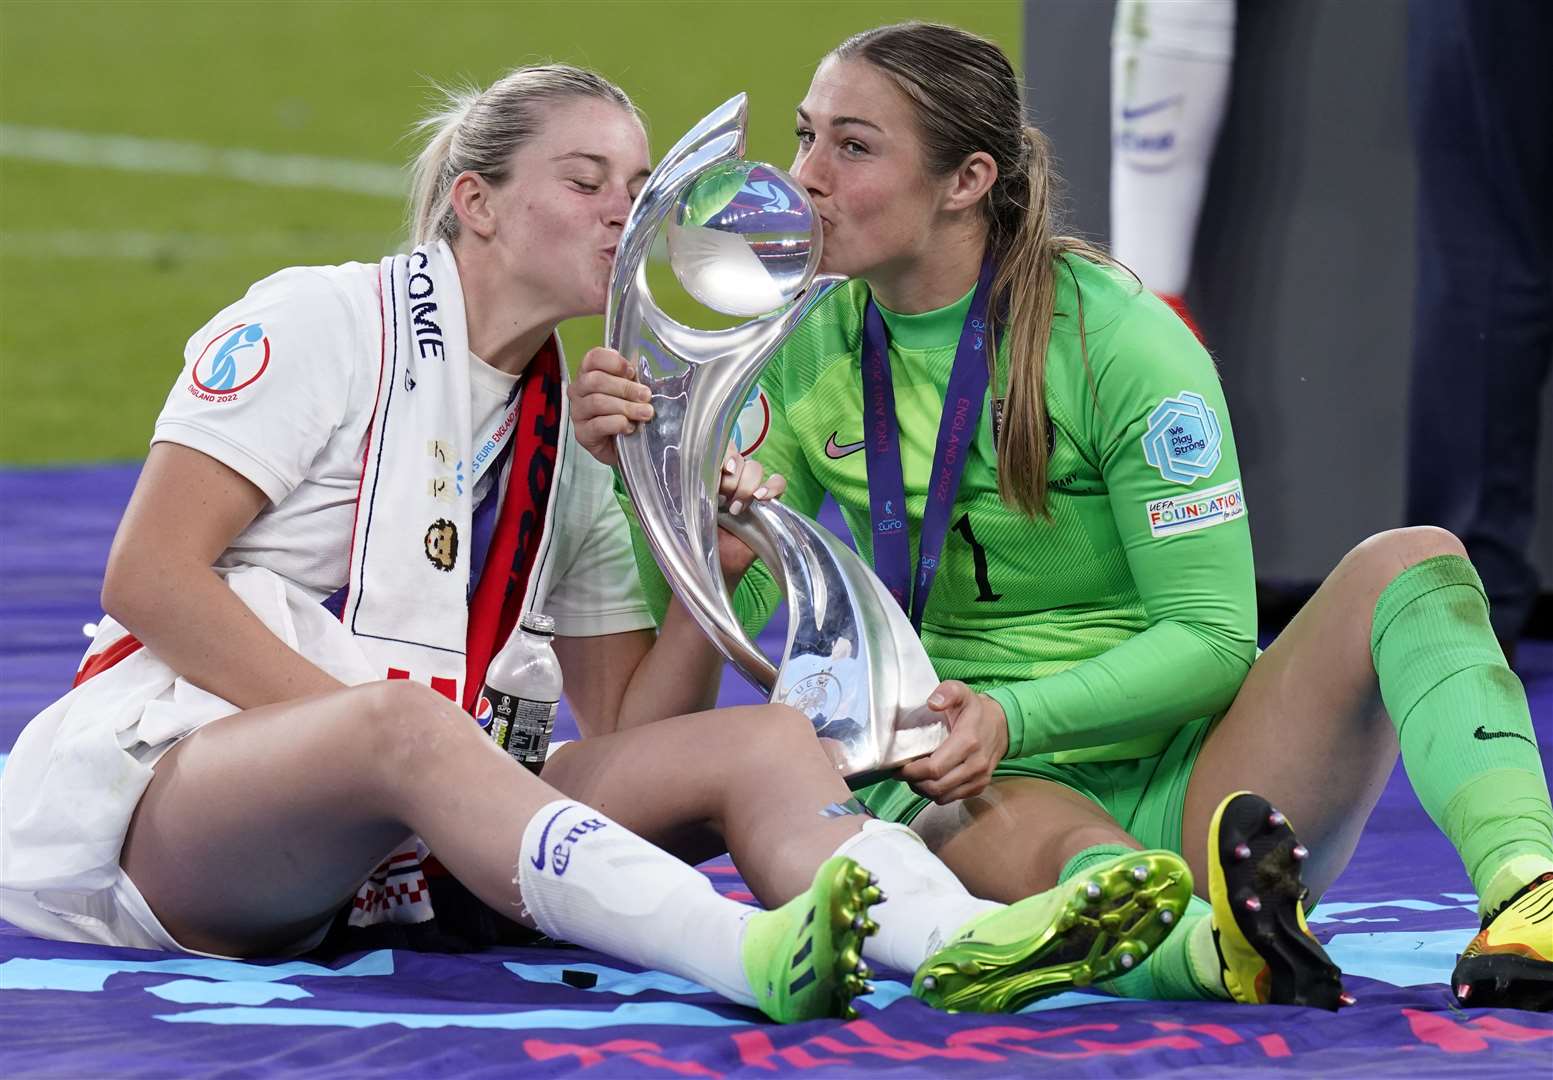 Alessia Russo, born in Maidstone, and goalkeeper Mary Earps celebrate with the trophy following Sunday's victory for England over Germany in the UEFA Women's Euro 2022 final at Wembley. Picture: Picture: Danny Lawson / PA Images